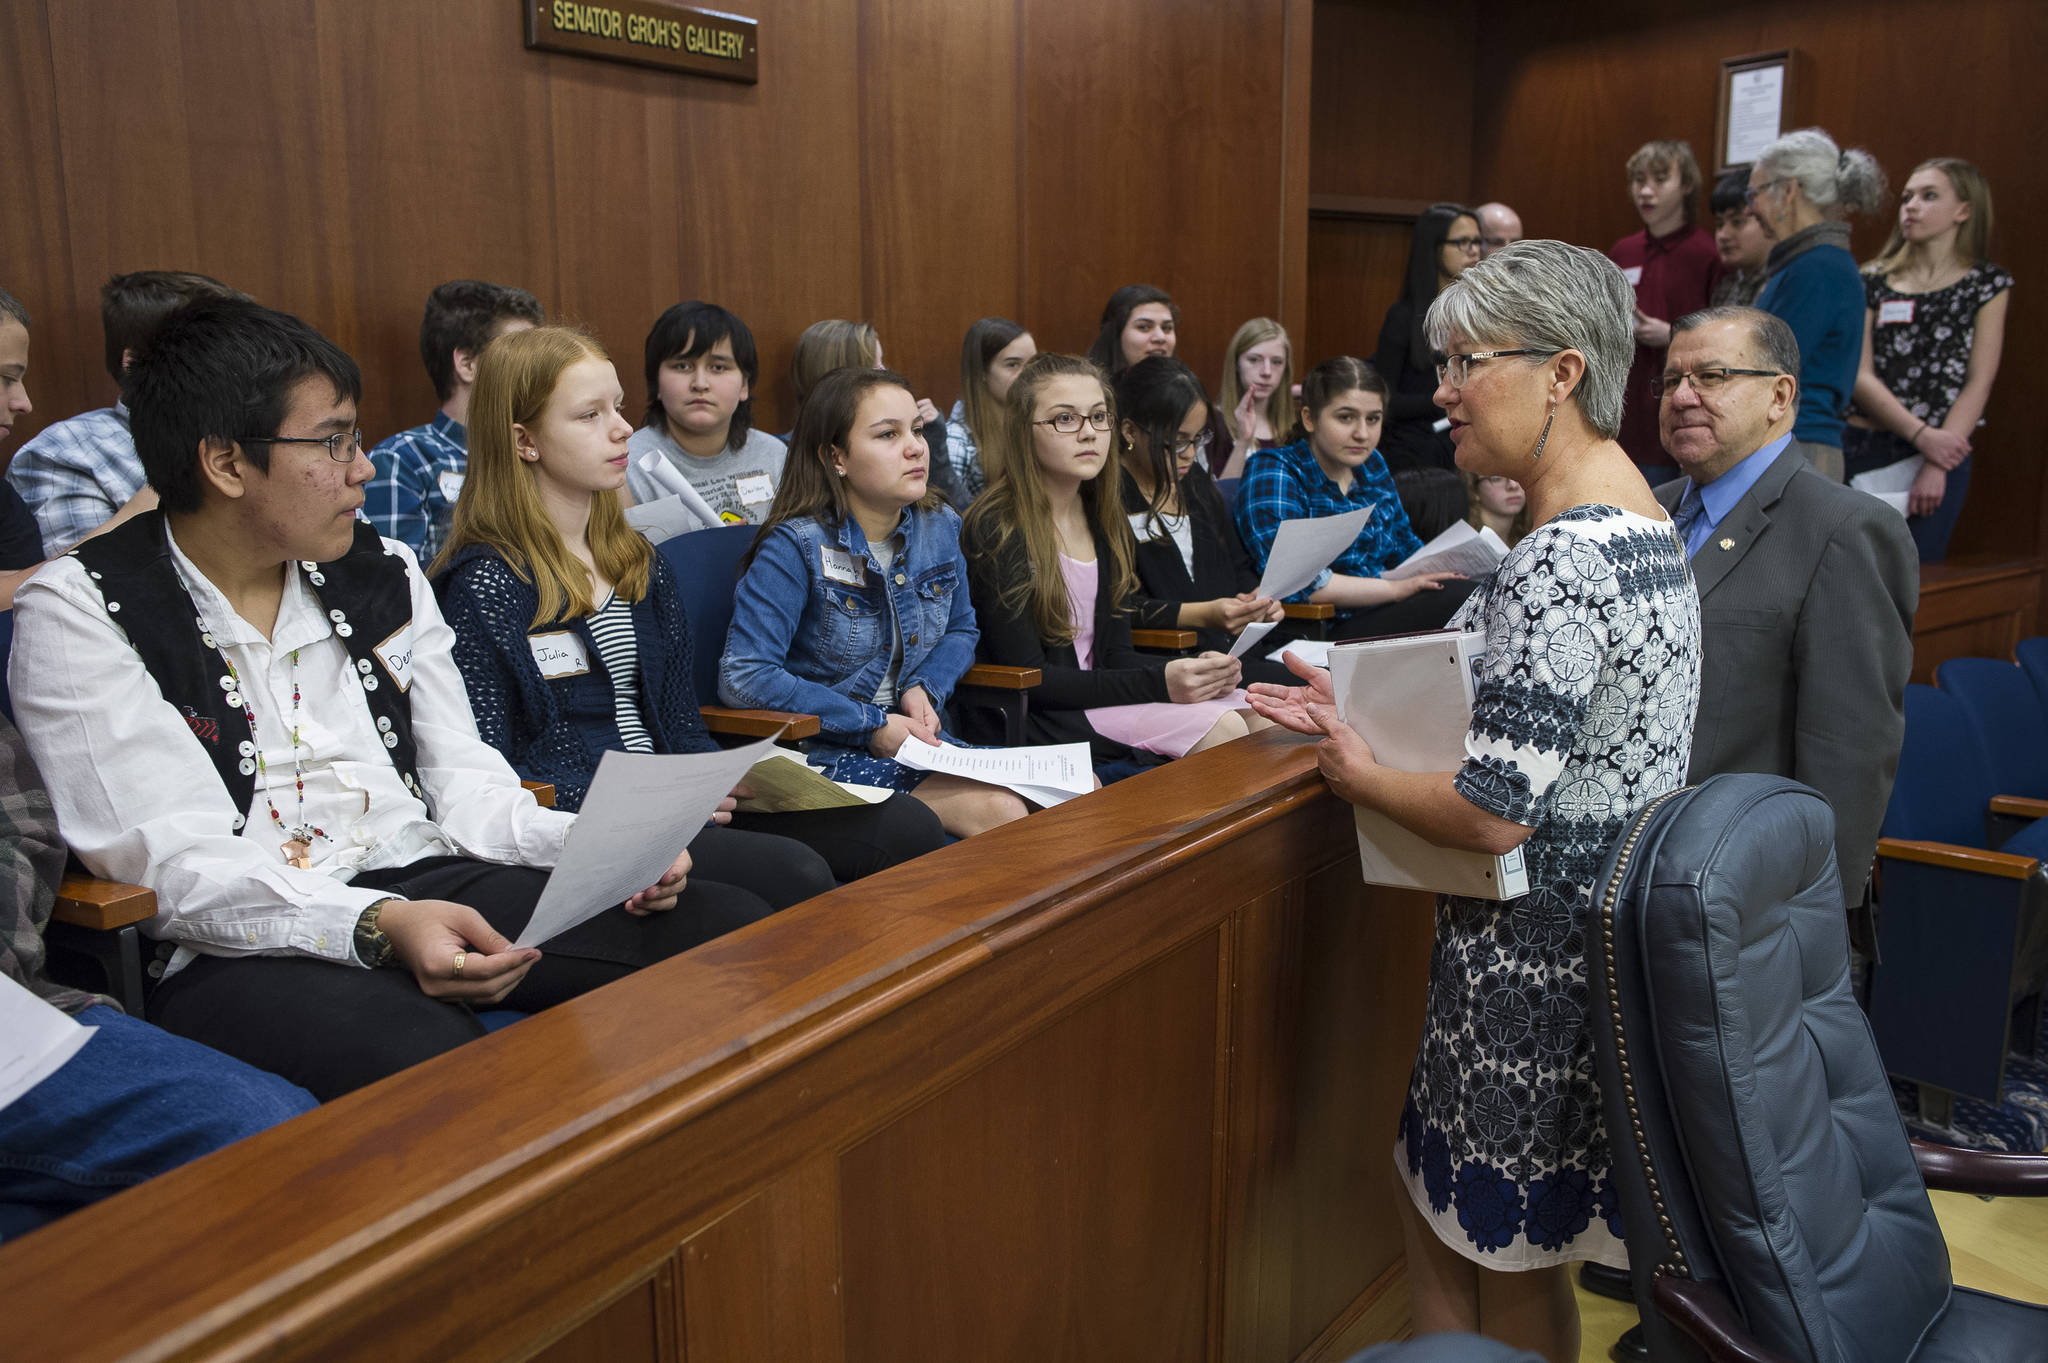 Sen. Anna MacKinnon, R-Eagle River, and Sen. Lyman Hoffman, D-Bethel, speak to Floyd Dryden Middle School eighth grade students just before a floor session at the Capitol on Monday, Jan. 29, 2018. The League of Women Voters of Juneau and The Alaska Committee are sponsoring a program to bring all of Juneau’s 400 eighth grade students to the Capitol for an introduction to the executive, legislative and judicial branches. (Michael Penn | Juneau Empire)